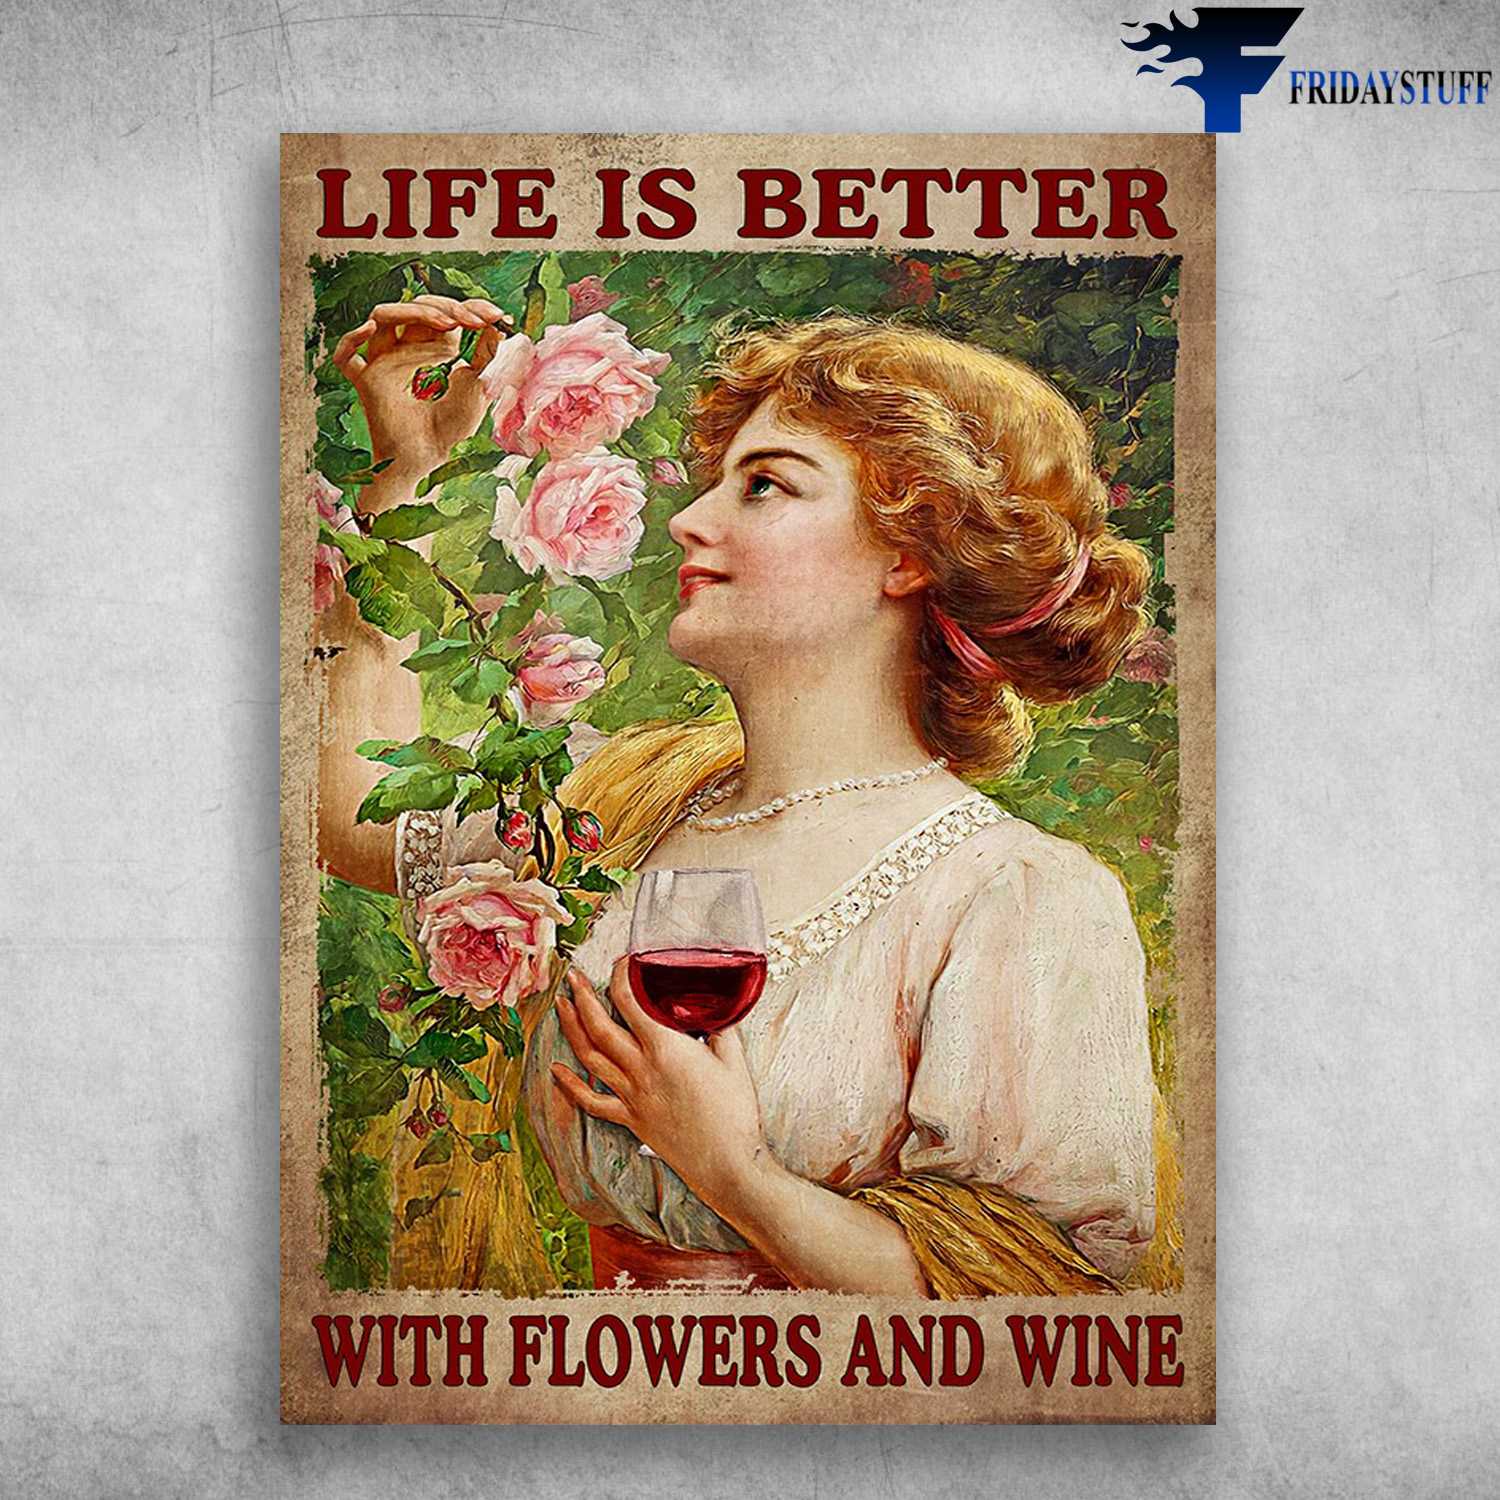 Girl Loves Wine, Flower And Wine - Life Is Better, With Flowers And Wine, Drinking Wine